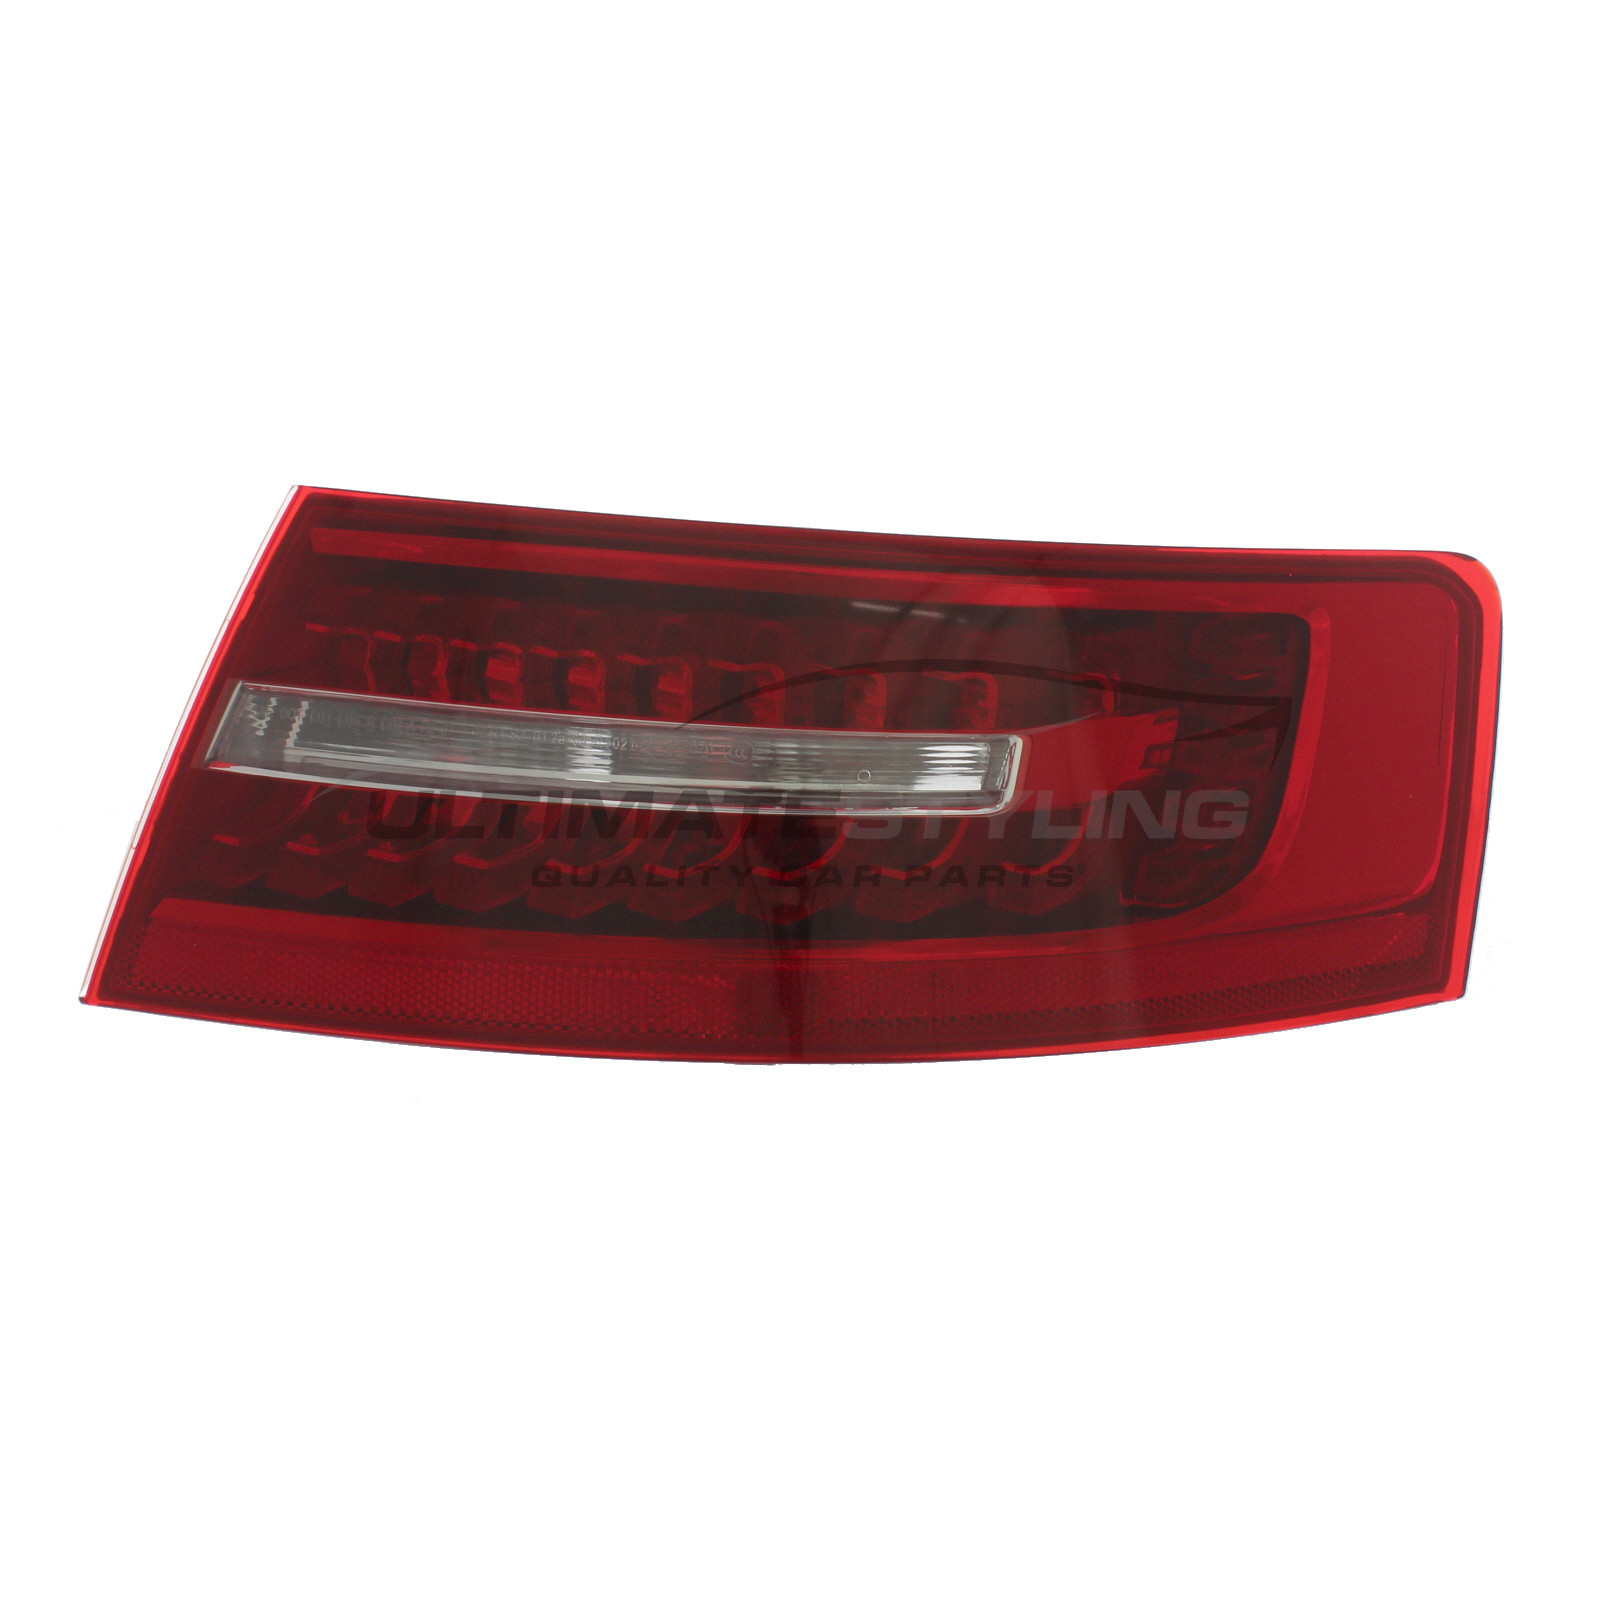 Audi A6 2008-2011 / Audi RS6 2008-2011 / Audi S6 2008-2011 LED Outer (Wing) Rear Light / Tail Light Excluding Bulb Holder Drivers Side (RH)